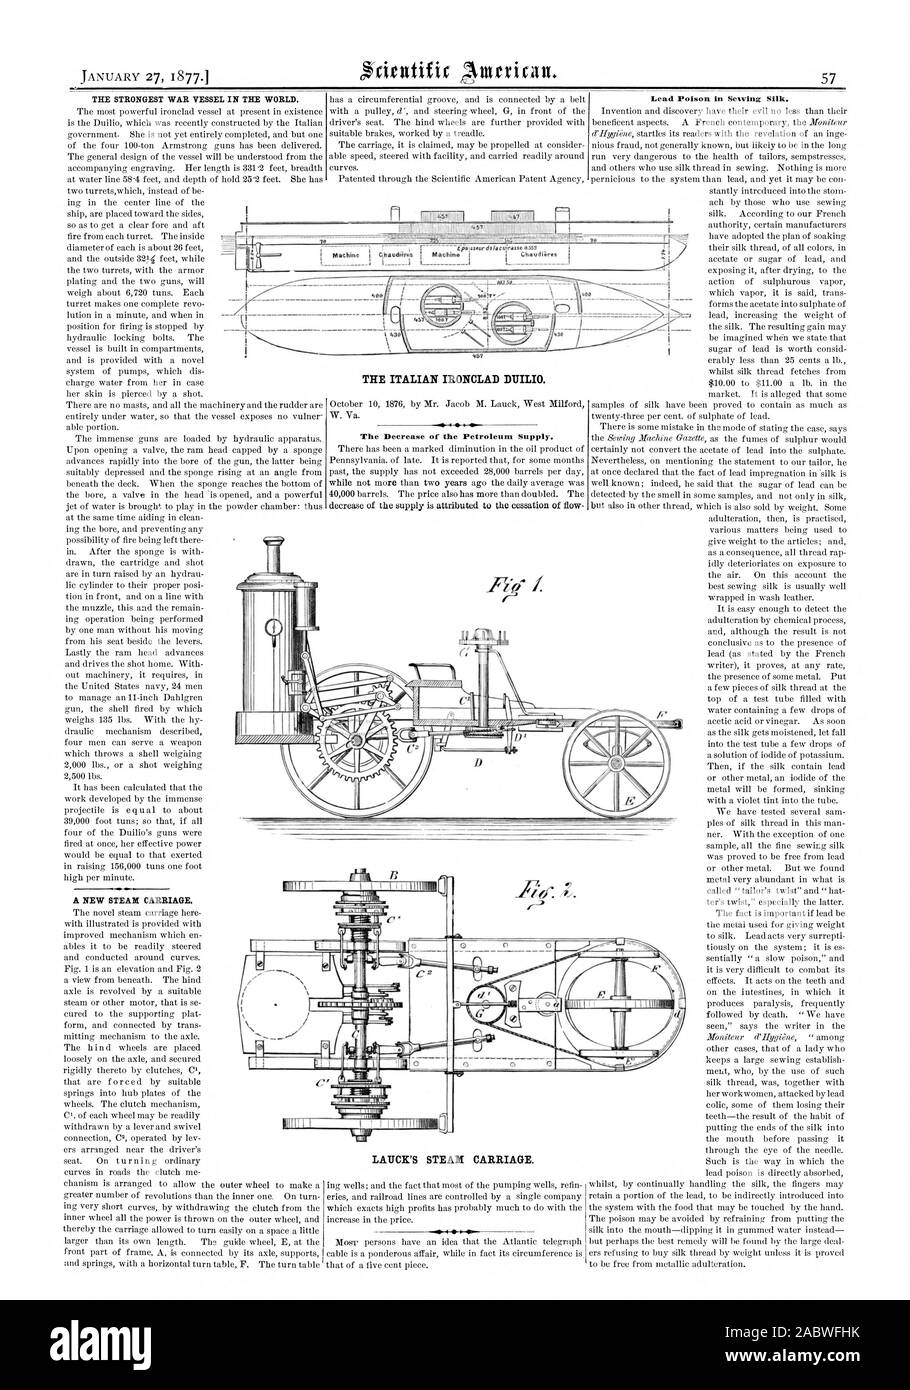 Machine THE ITALIAN IRONCLAD DIIILIO. The Decrease of the Petroleum Supply. 4 LAUCK'S STEAM CARRIAGE. Lead Poison in Sewing Silk. '7 400, scientific american, 1877-01-27 Stock Photo